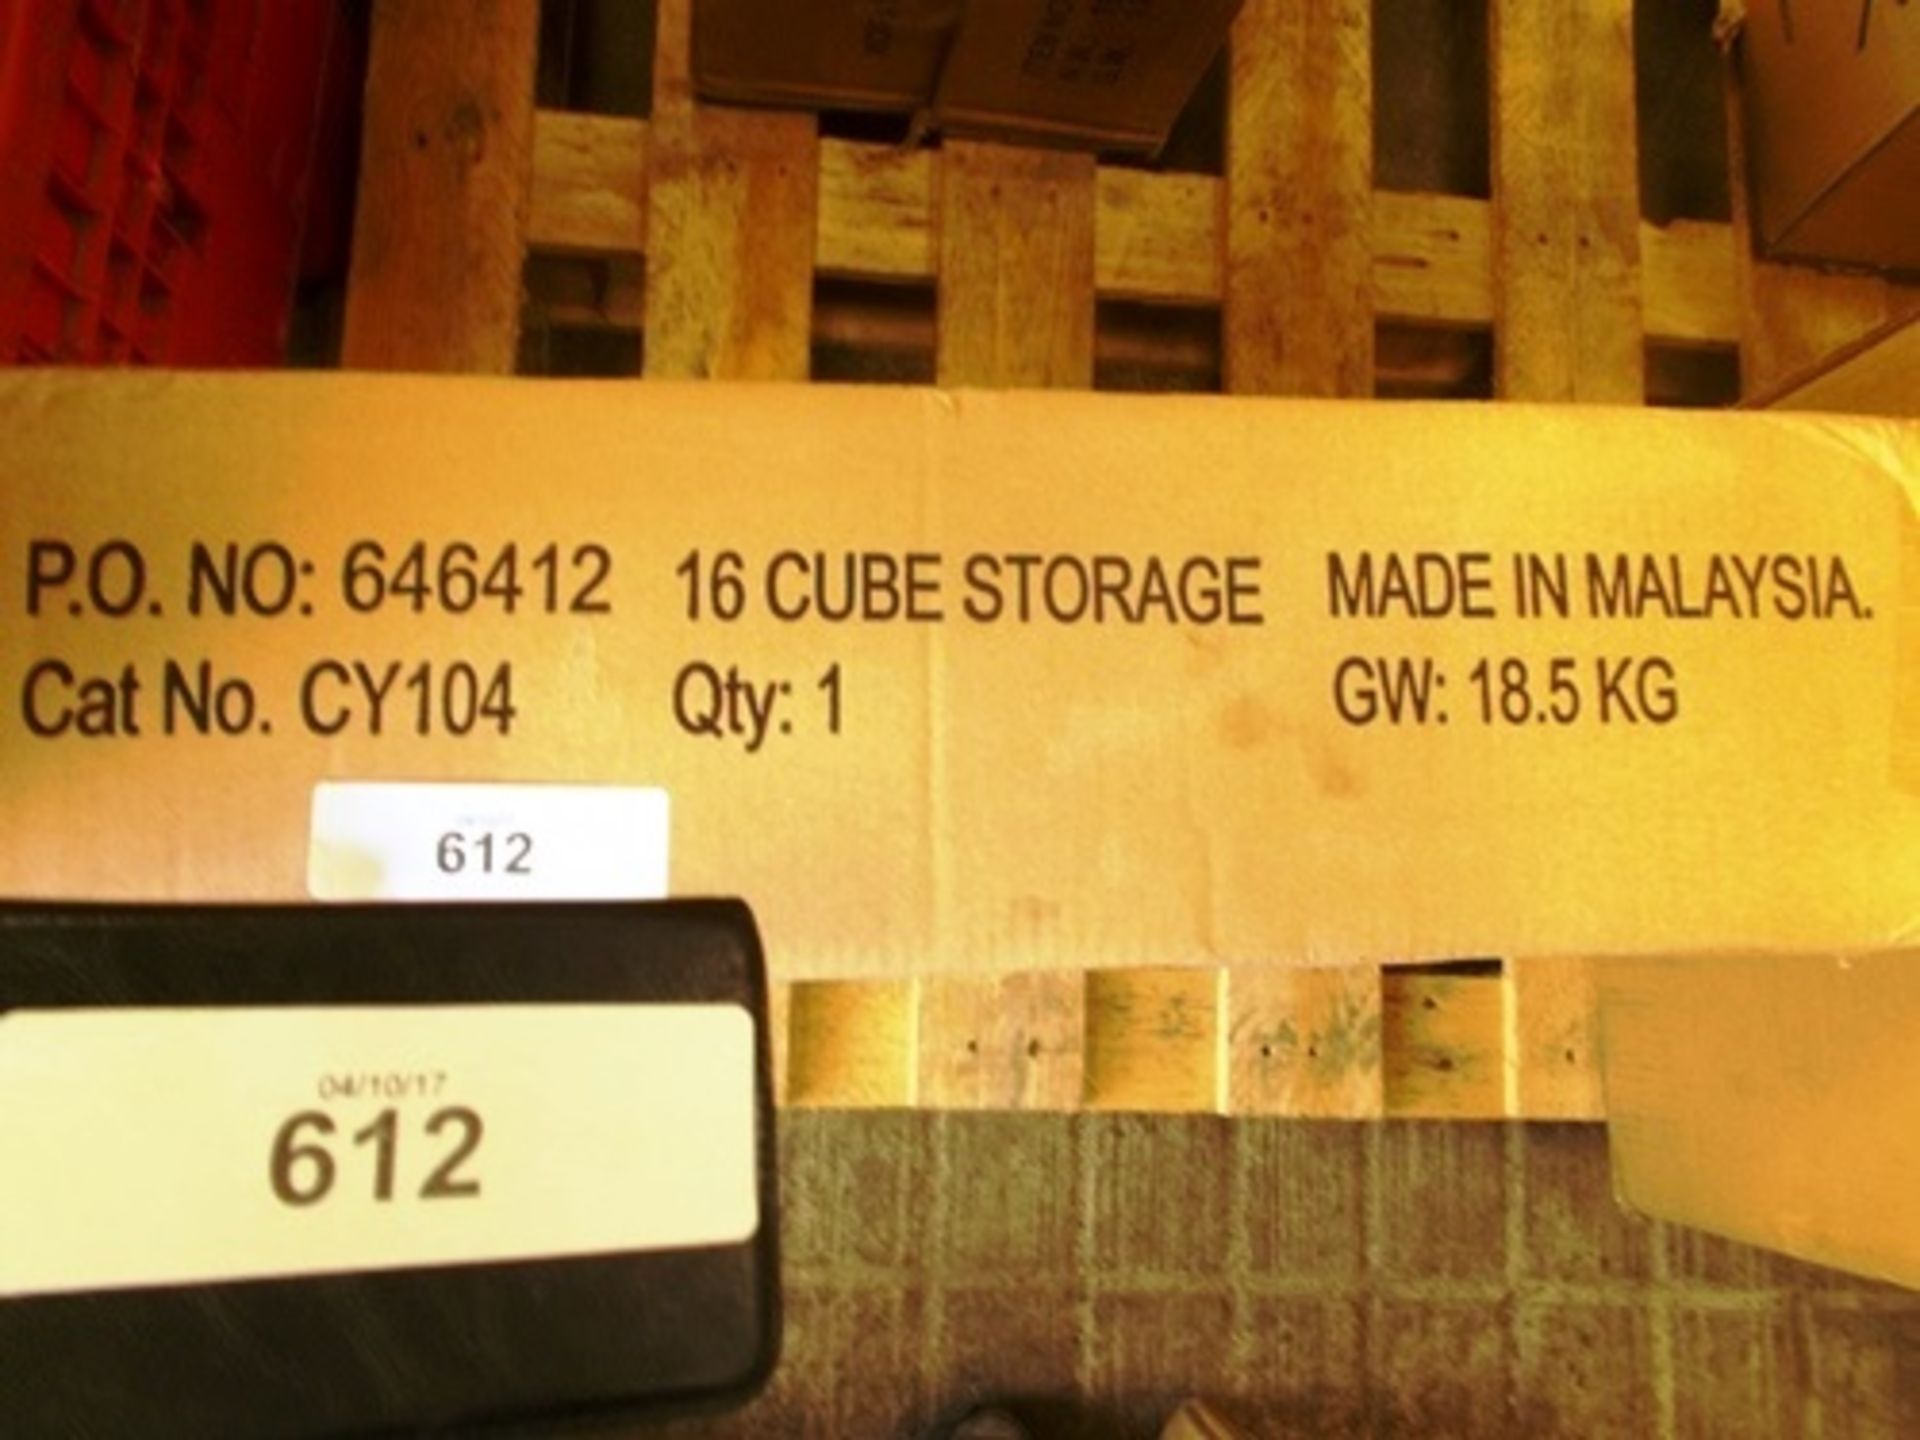 A 16 cube storage unit, model 646412 - Sealed new in box (Pallet7)